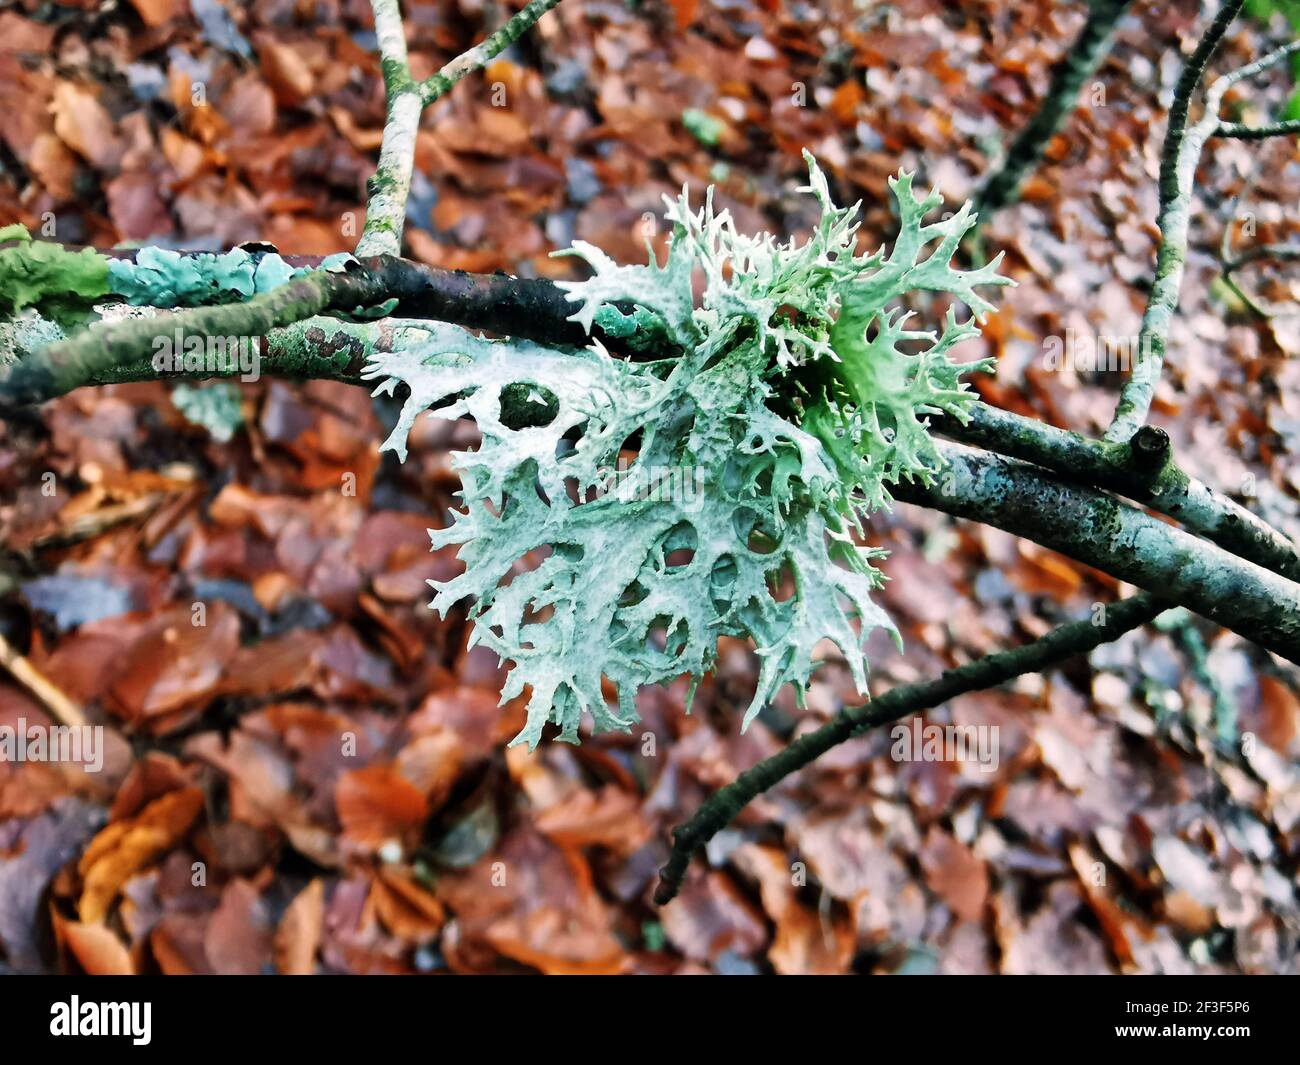 A shot of Evernia prunastri lichens on tree branches on the brown autumn leaves background Stock Photo